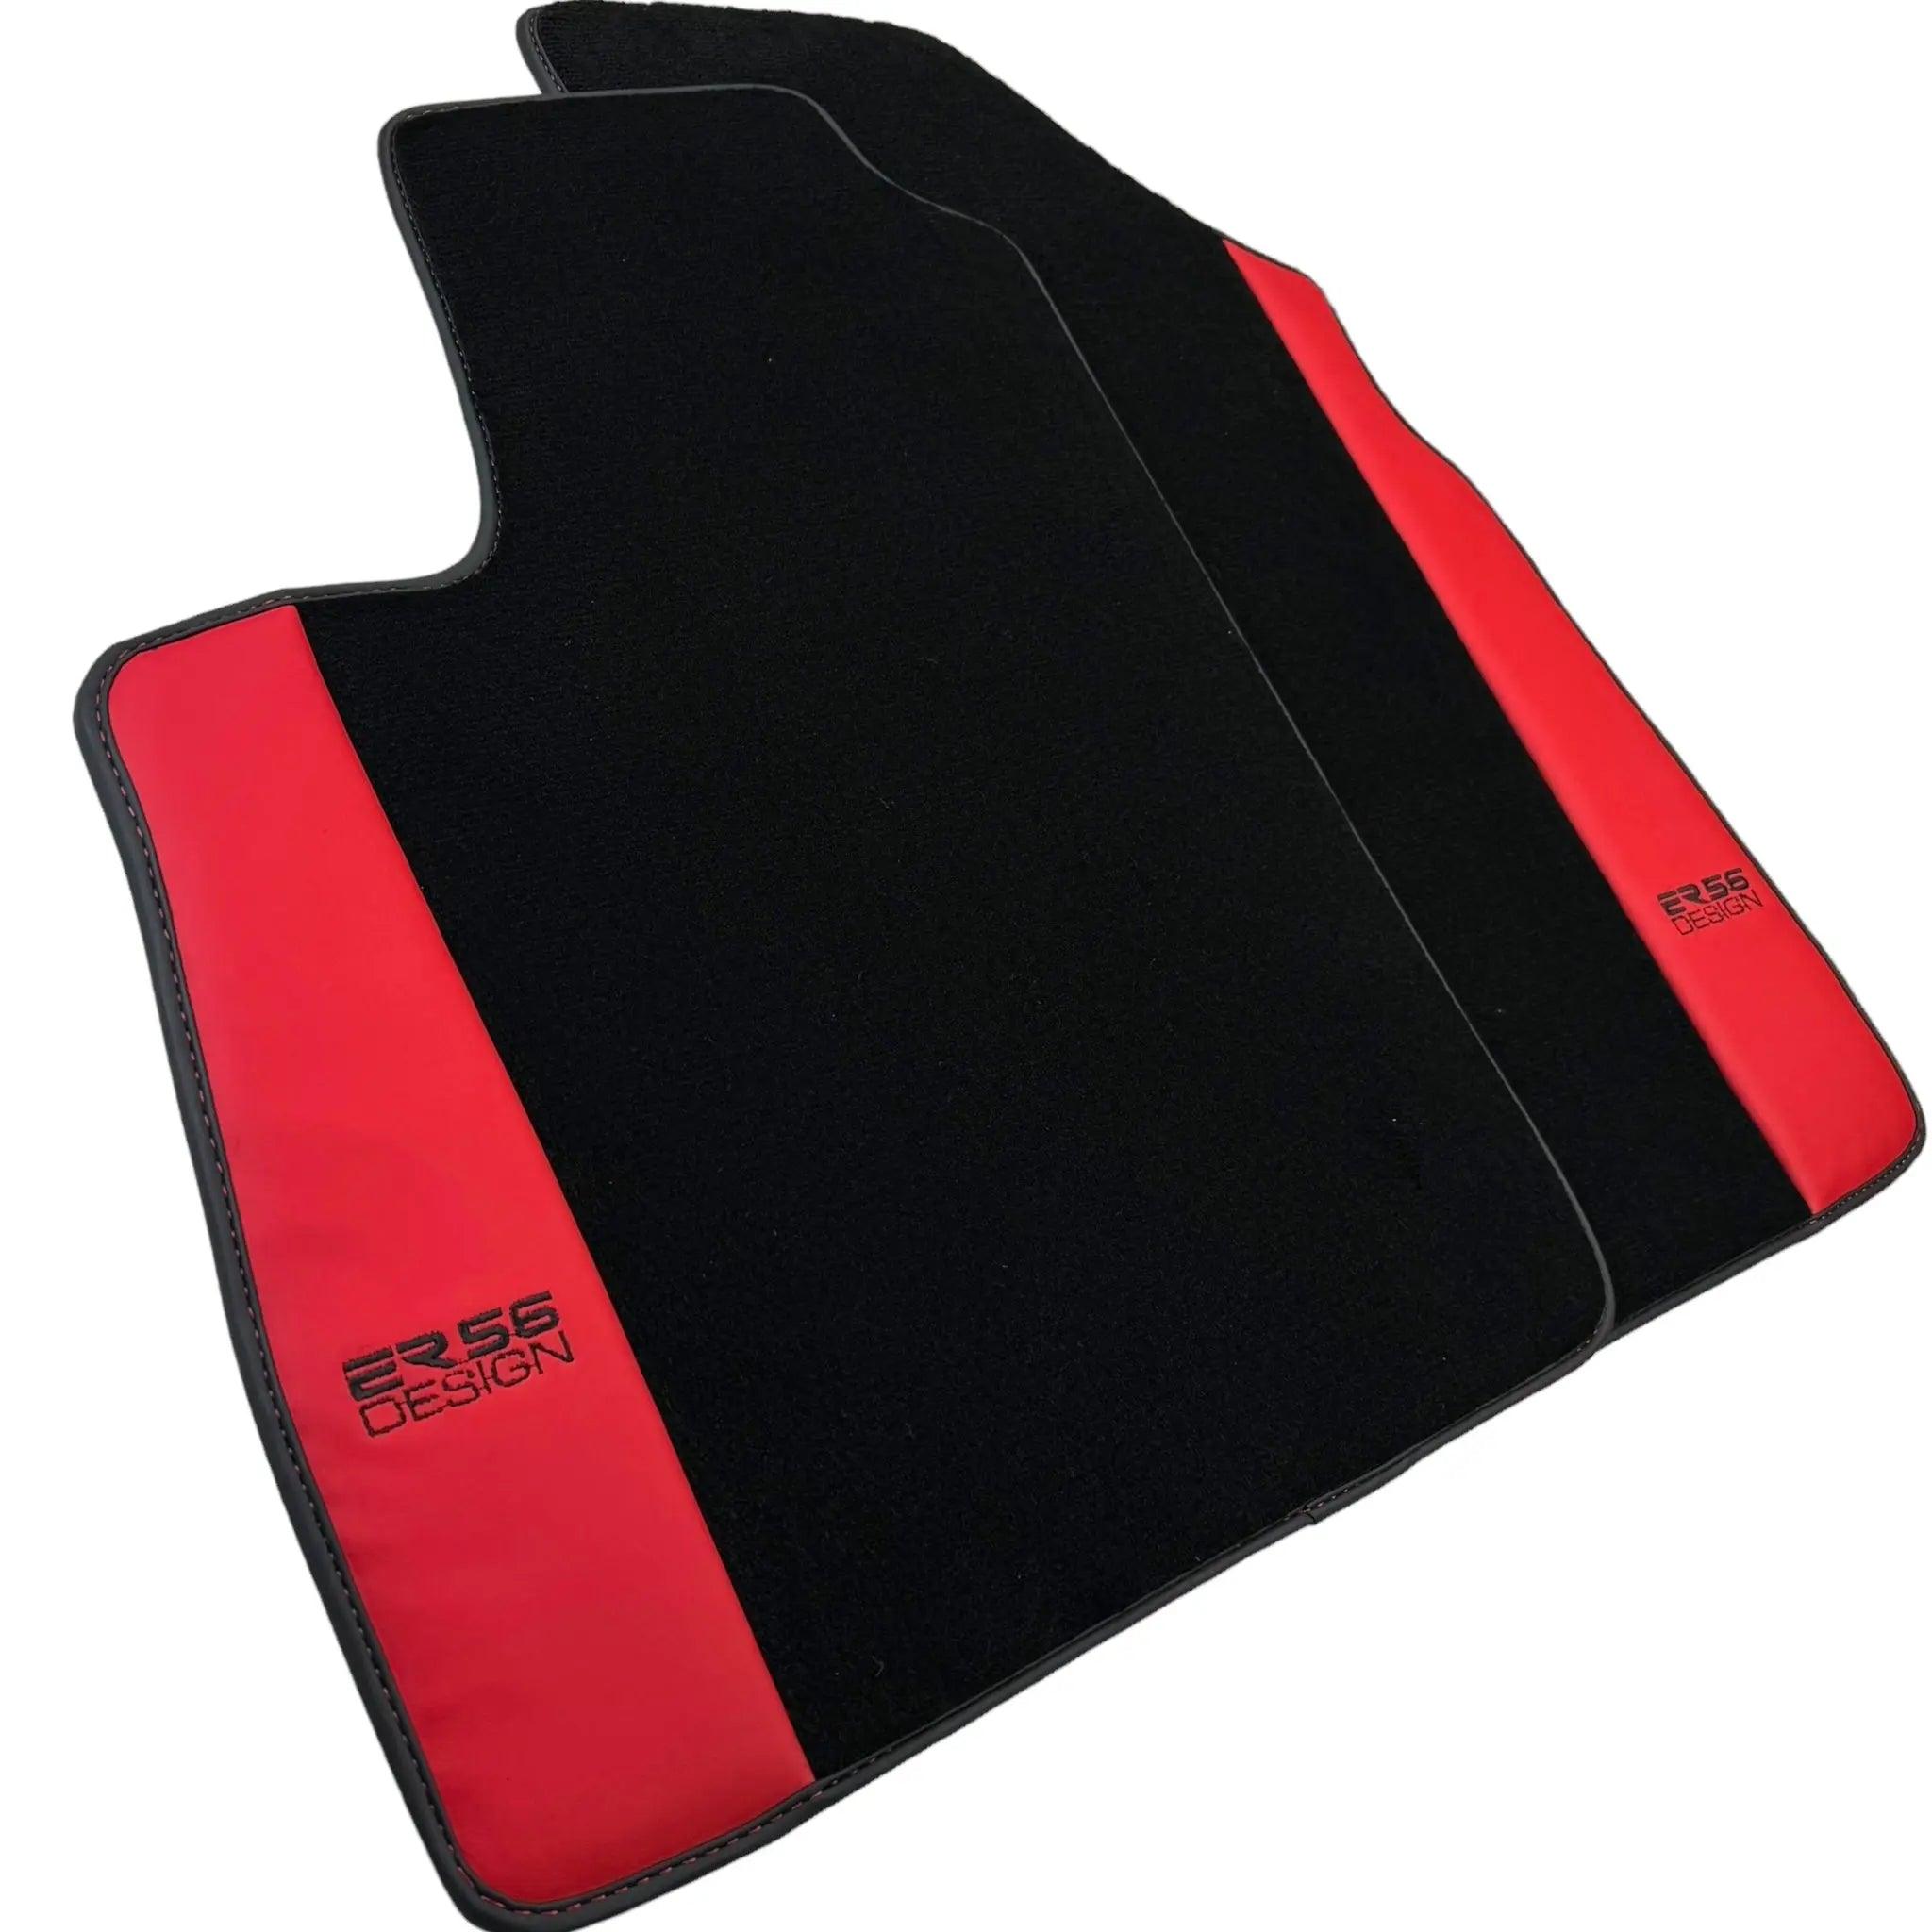 Black Floor Mats for Bentley Continental GT (2011–2018) with Red Leather | ER56 Design